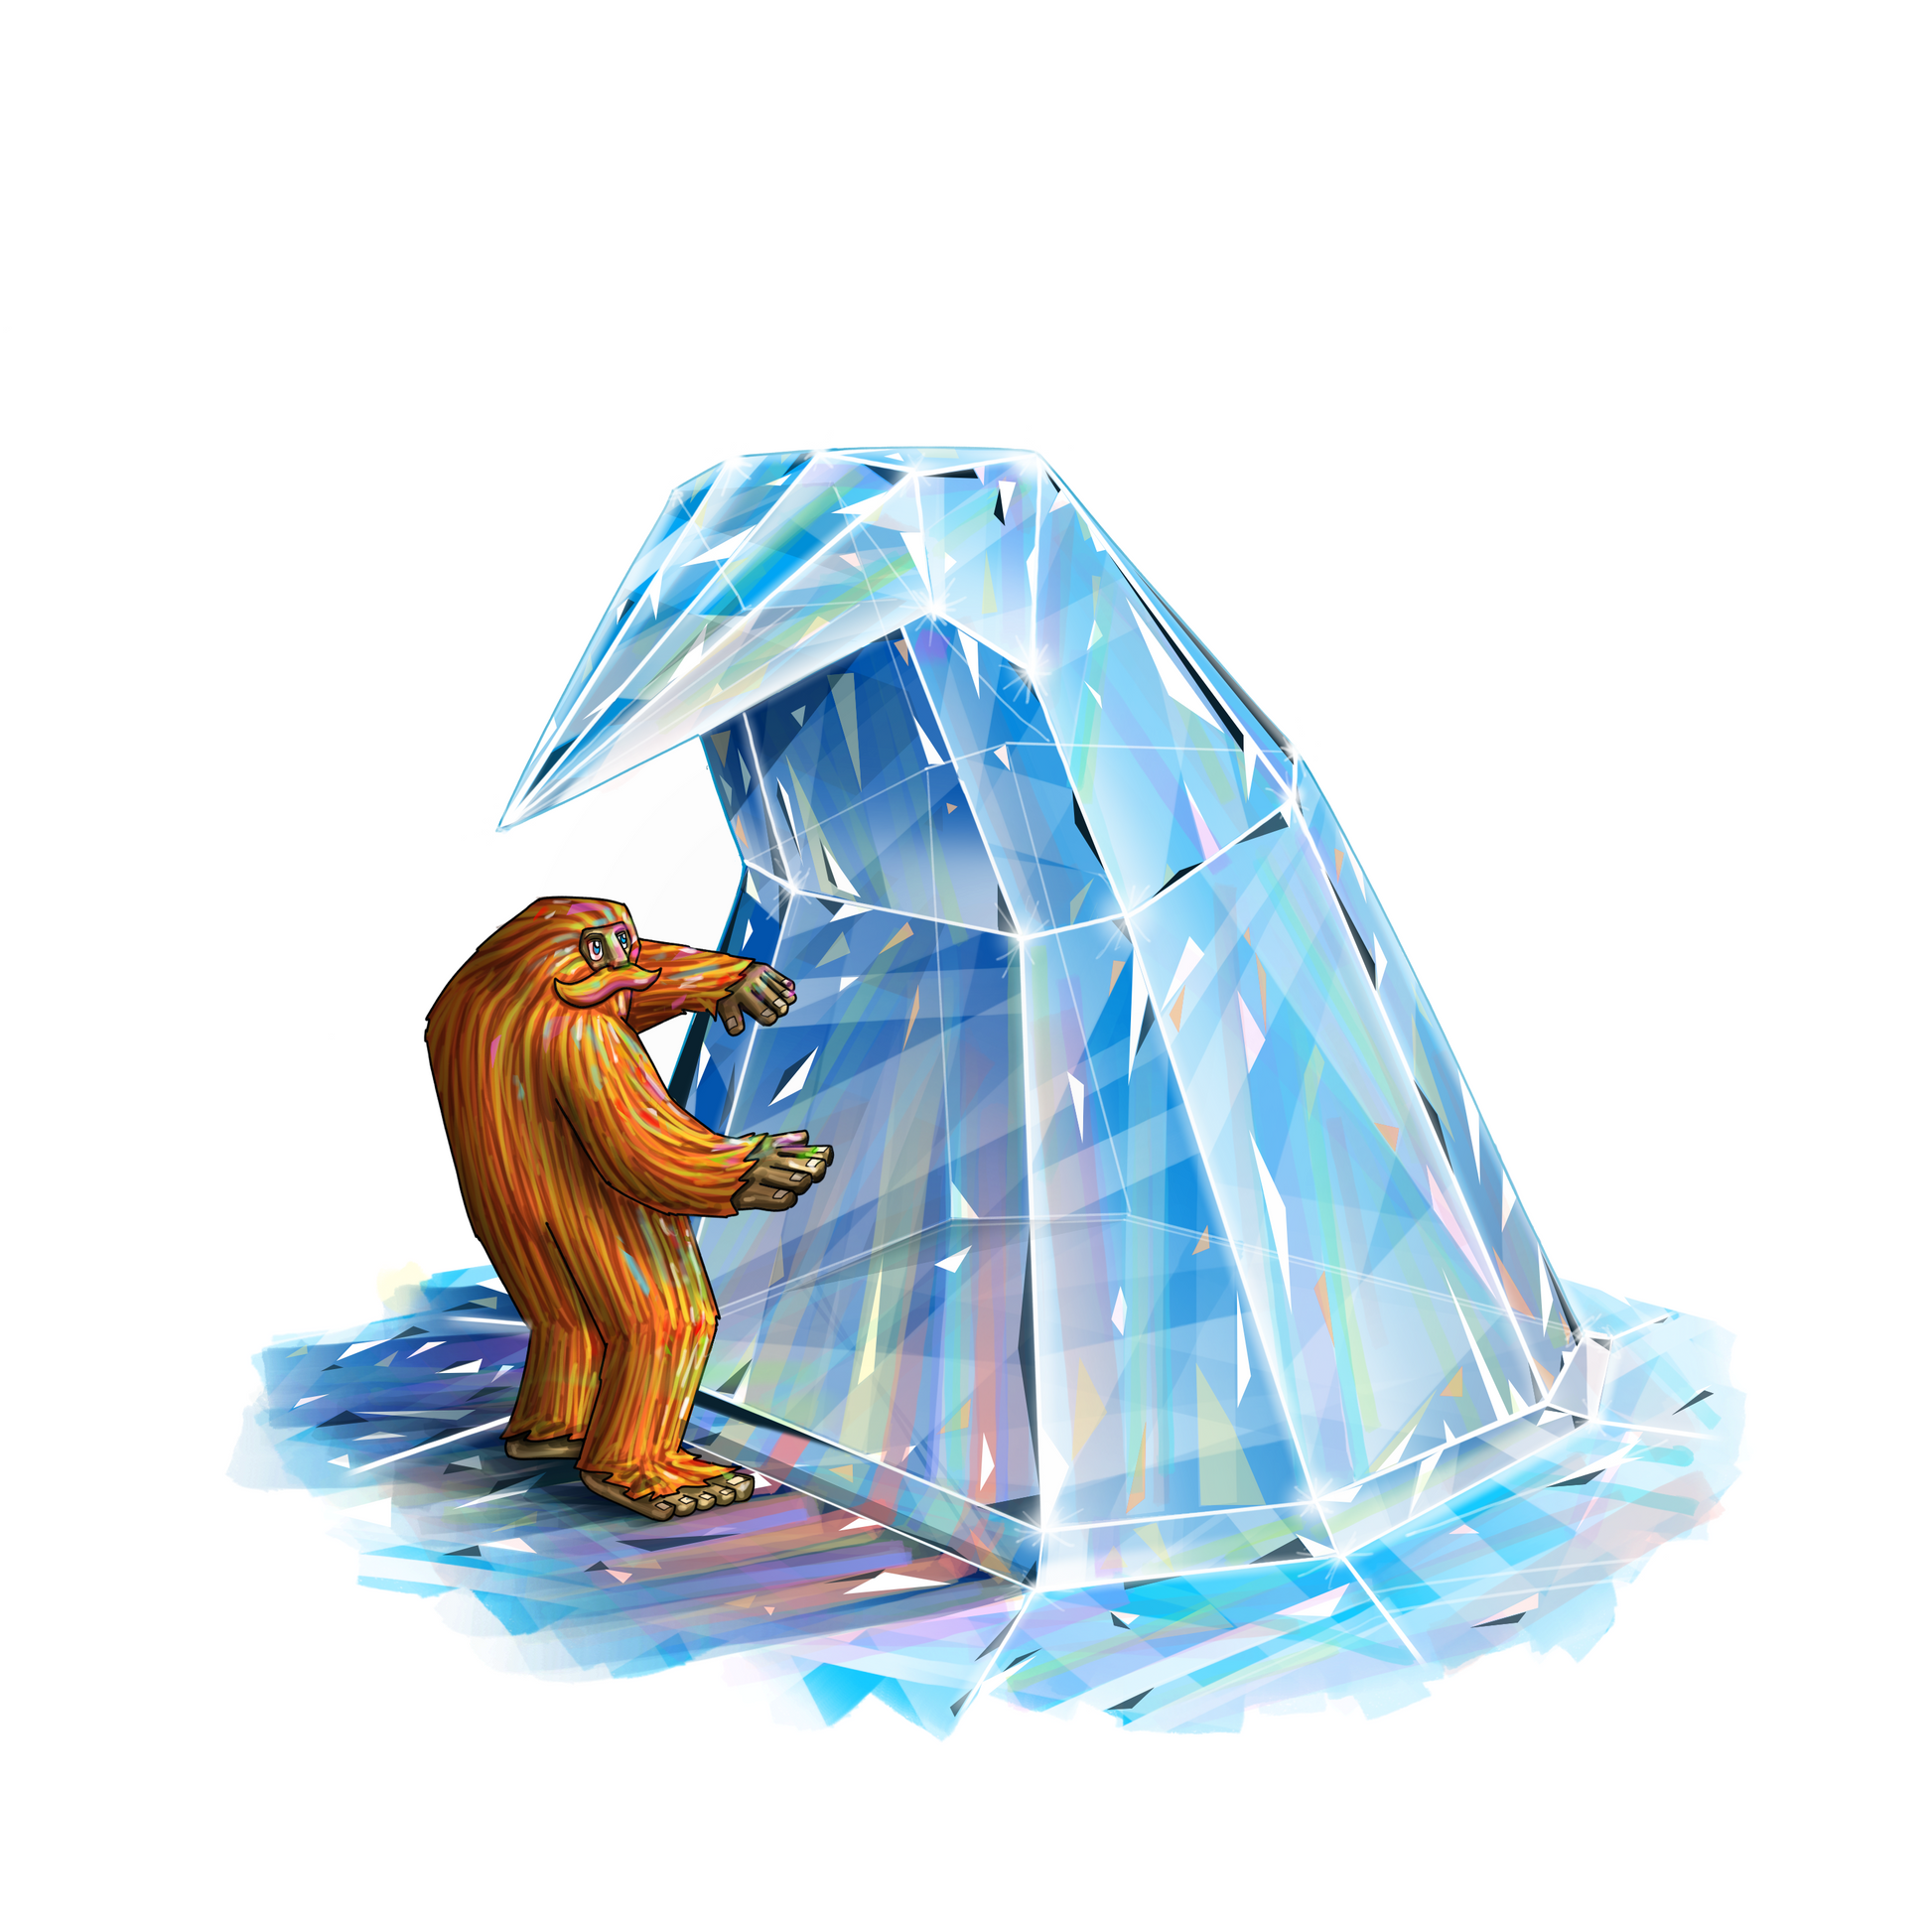 A vibrantly colored illustrtation of an orange sasquatch with a great moustache standing under a wave-shaped diamond with colorful reflections